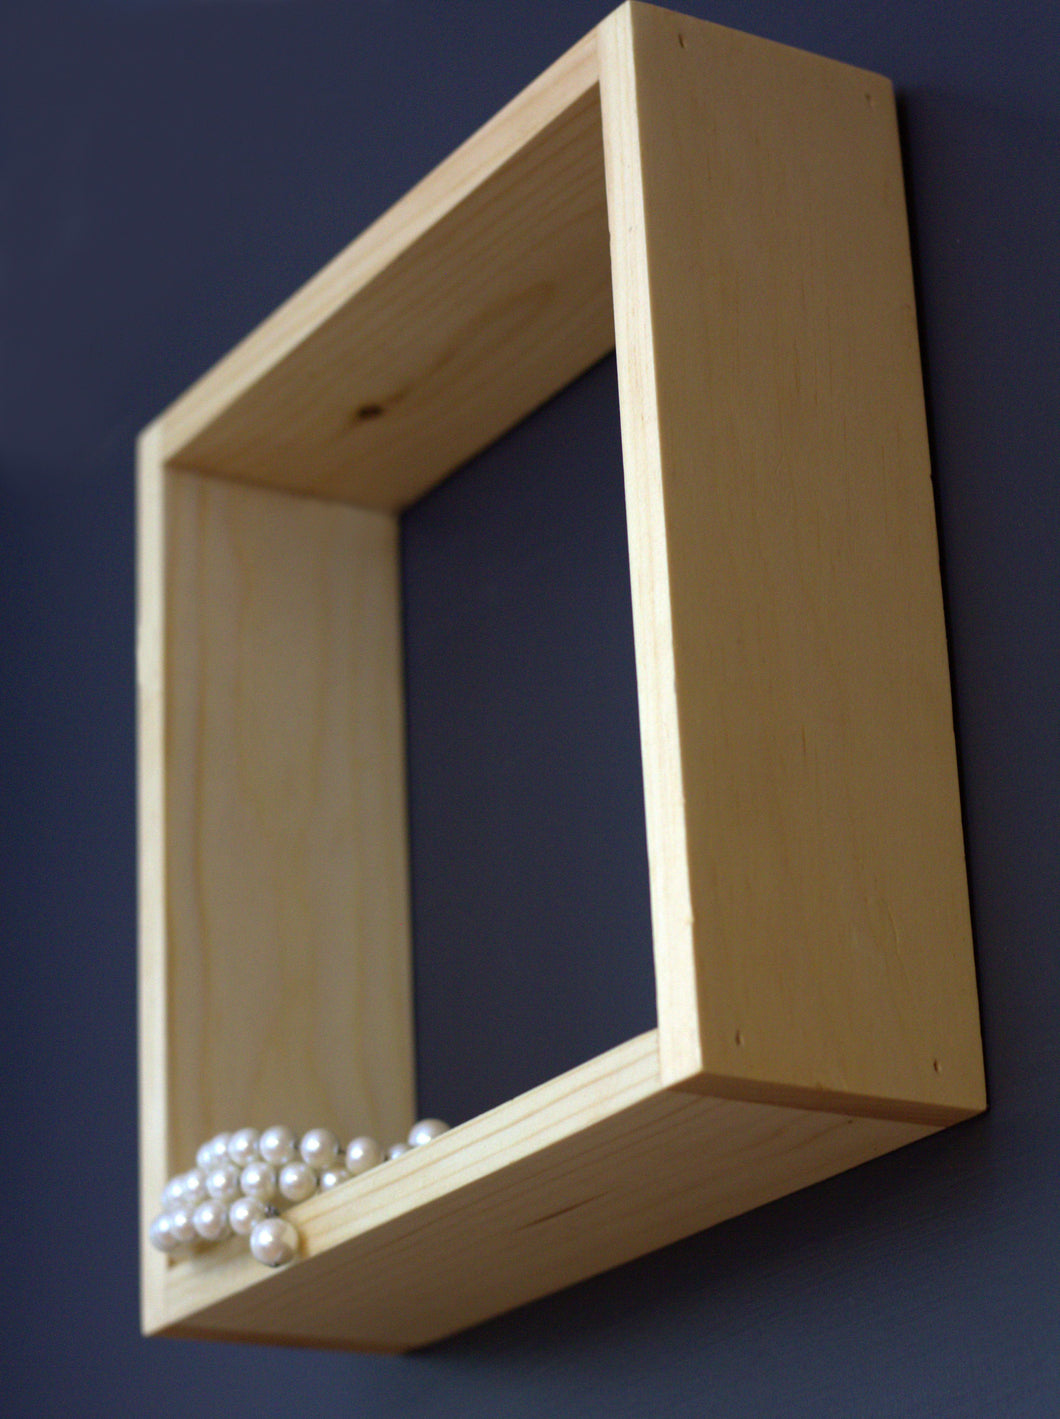 JTWoodworks cube shelf is a great way to get organized and display treasured items around your home or office. This functional wall cube shelf will help you stay organized in any space. 